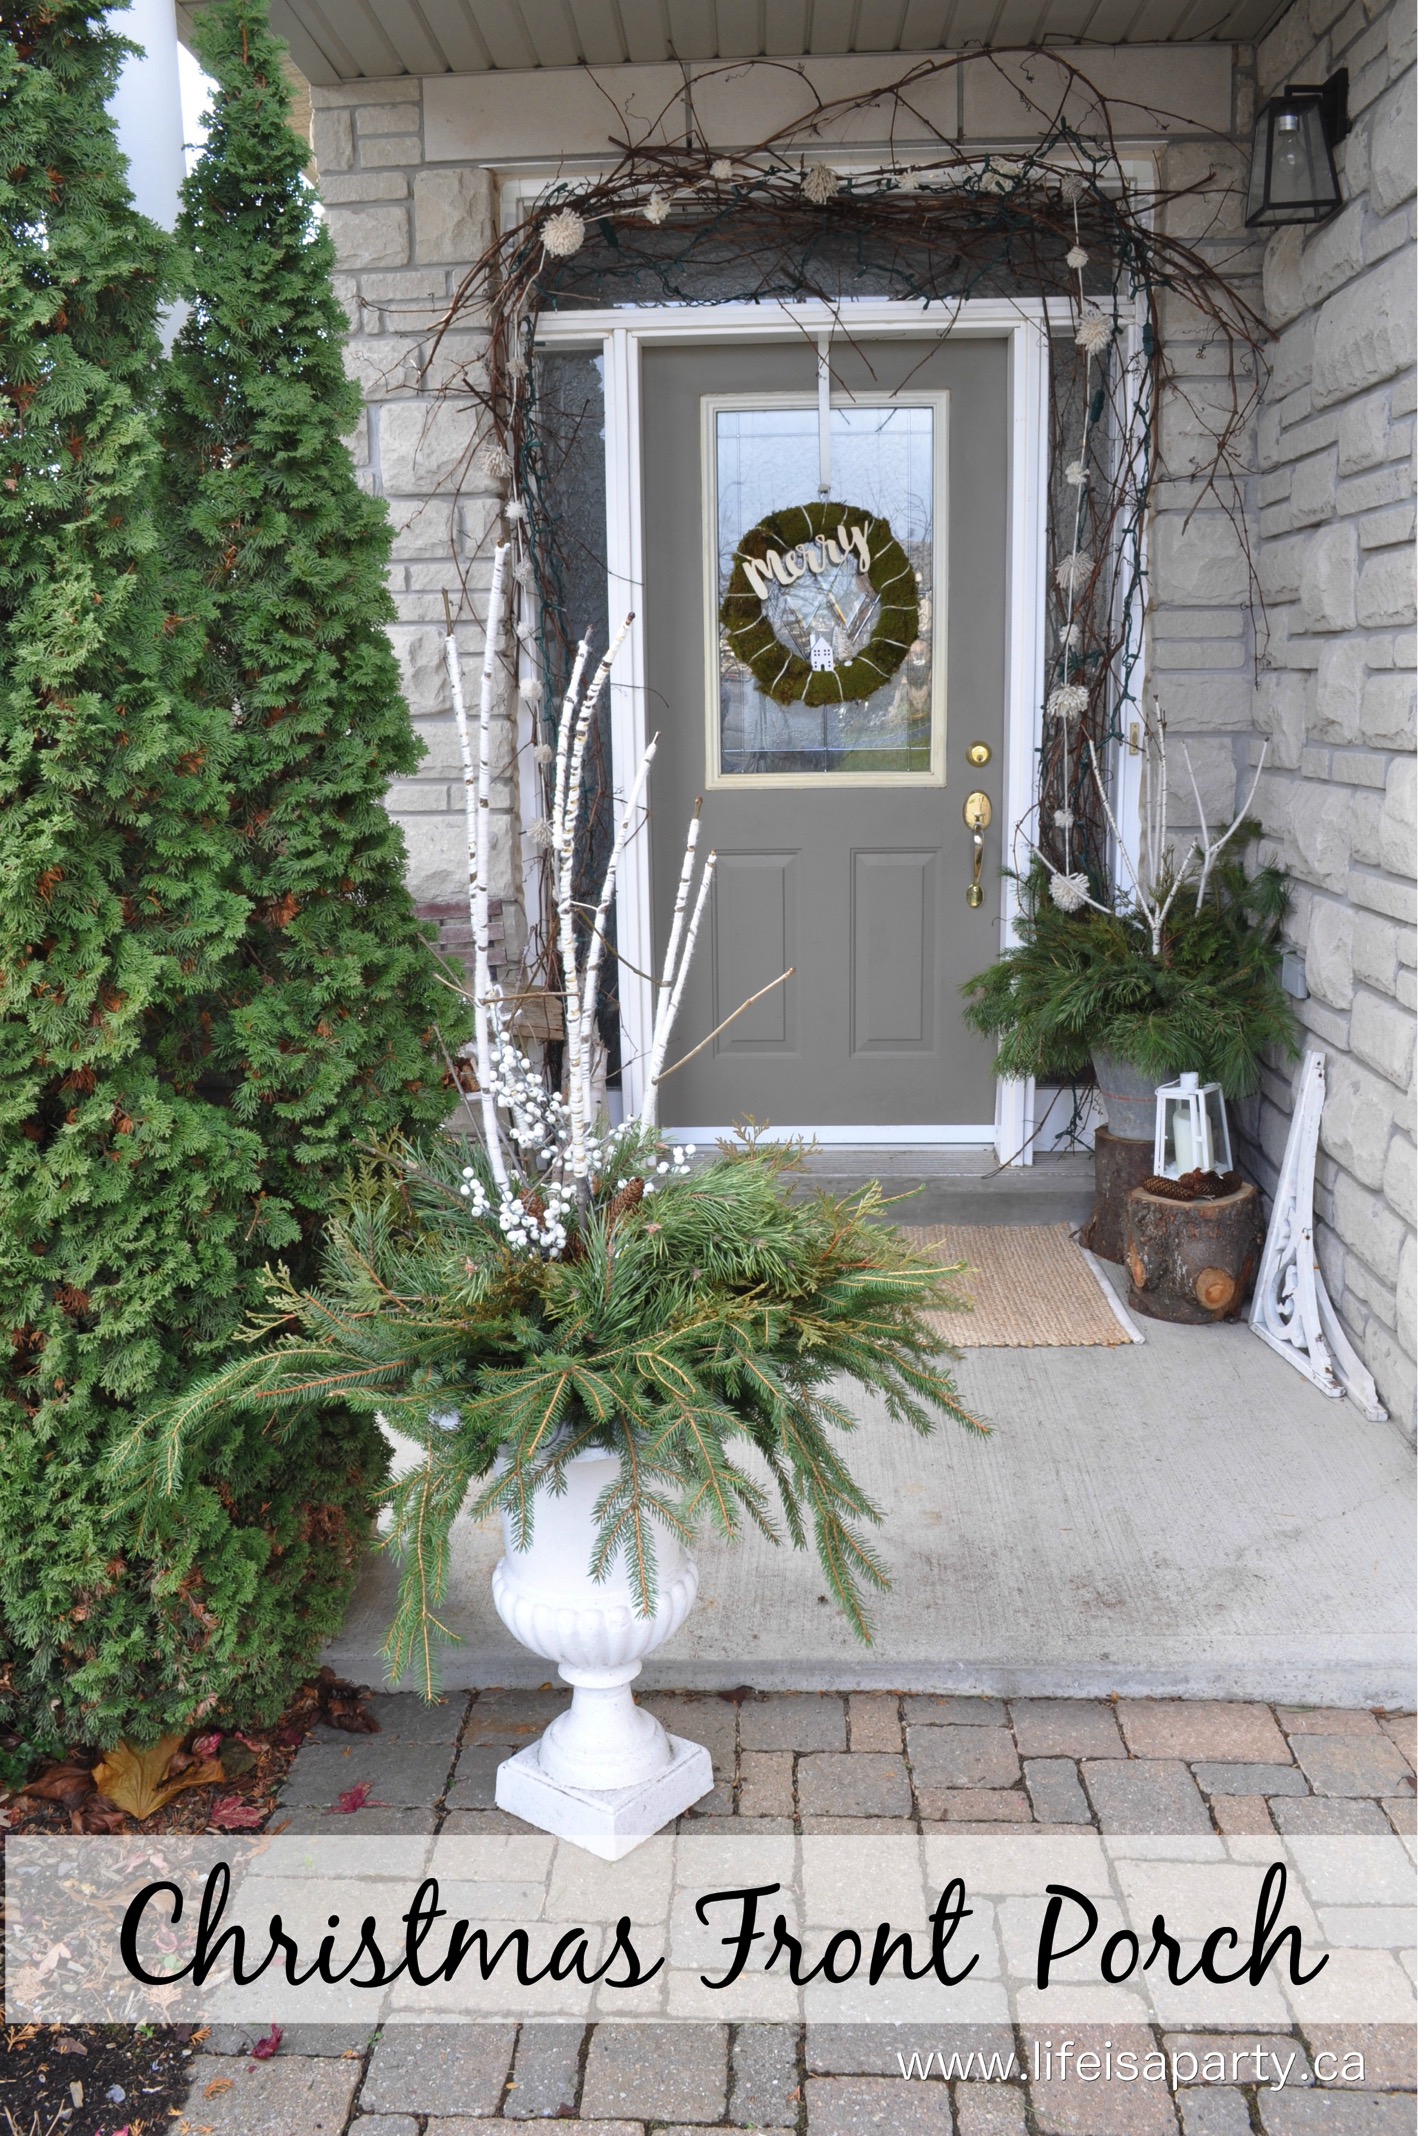 Outdoor Christmas Decorating Ideas for the Front Porch: yarn wrapped sticks, pom pom garland and a Christmas wreath add a festive touch.